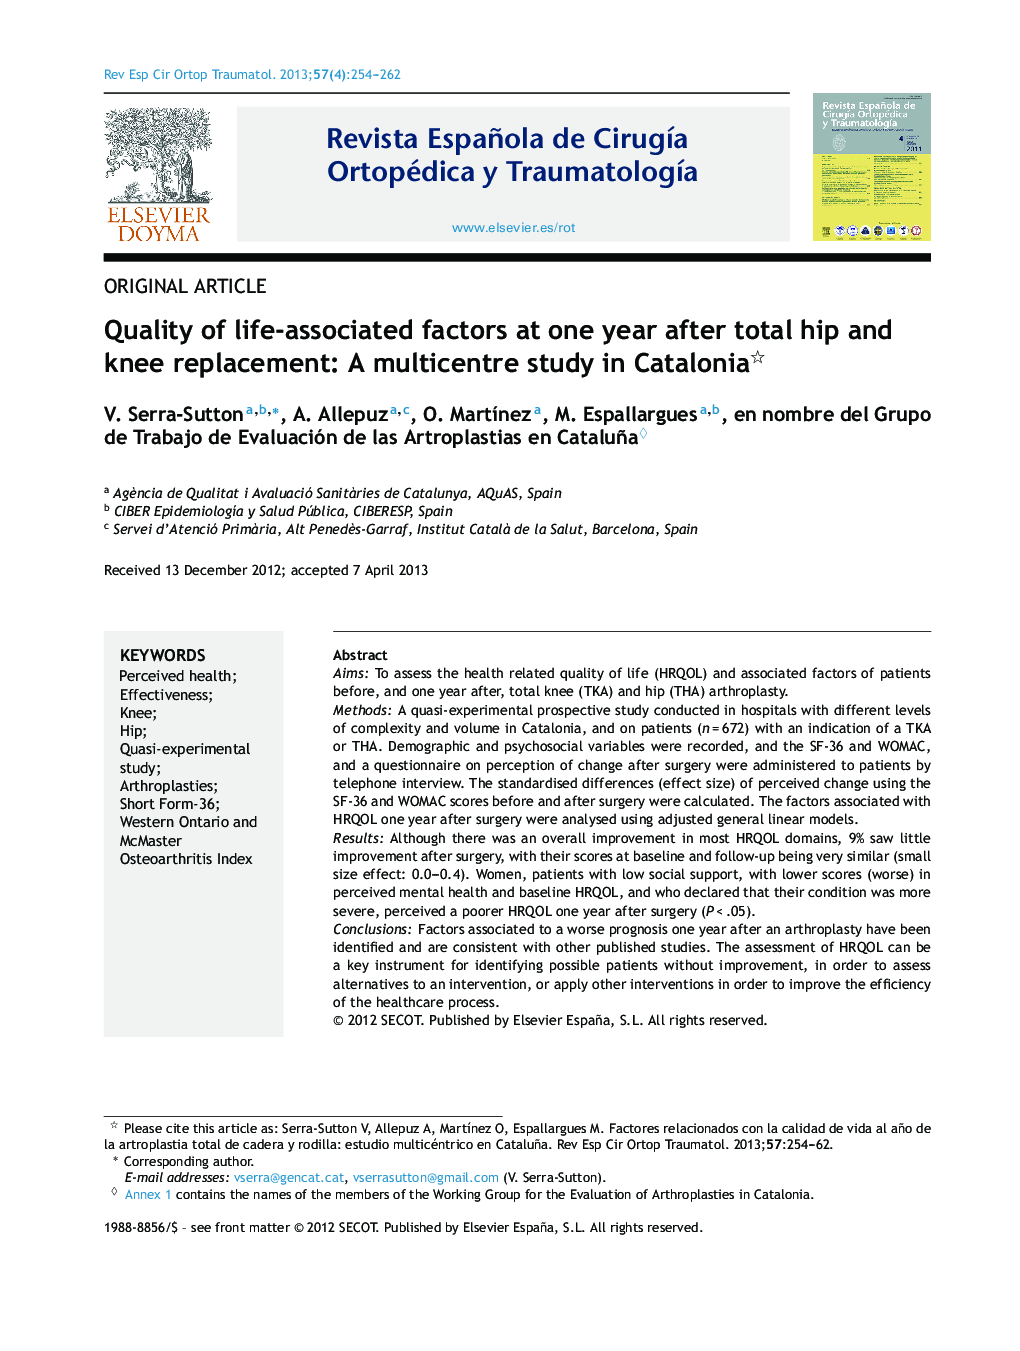 Quality of life-associated factors at one year after total hip and knee replacement: A multicentre study in Catalonia 